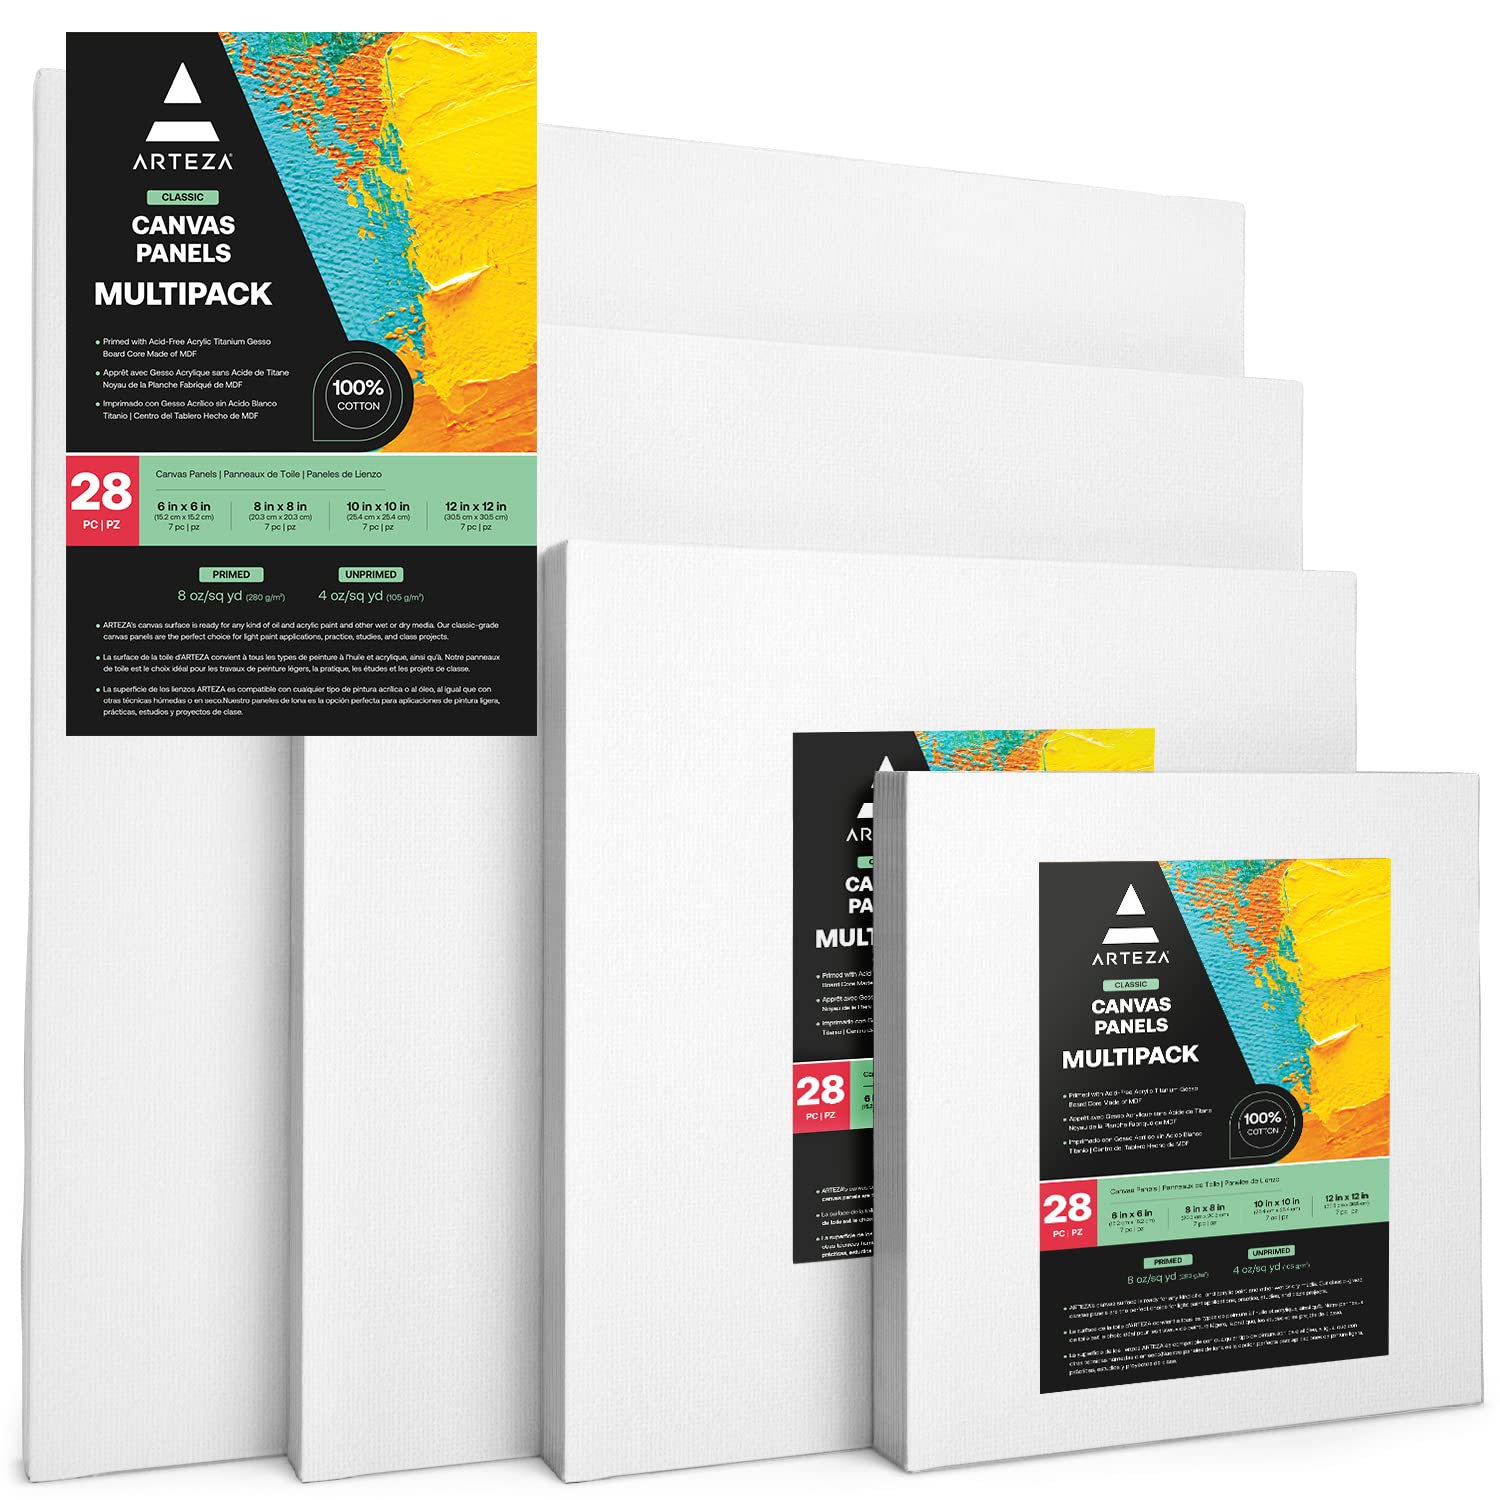 ARTEZA Canvases for Painting, Multipack of 28, 6 x 6, 8 x 8, 10 x 10, 12 x 12 Inches, Square Canvas Boards, 100% Cotton, 8 oz Gesso-Primed, Art Supplies for Acrylic and Oil Painting